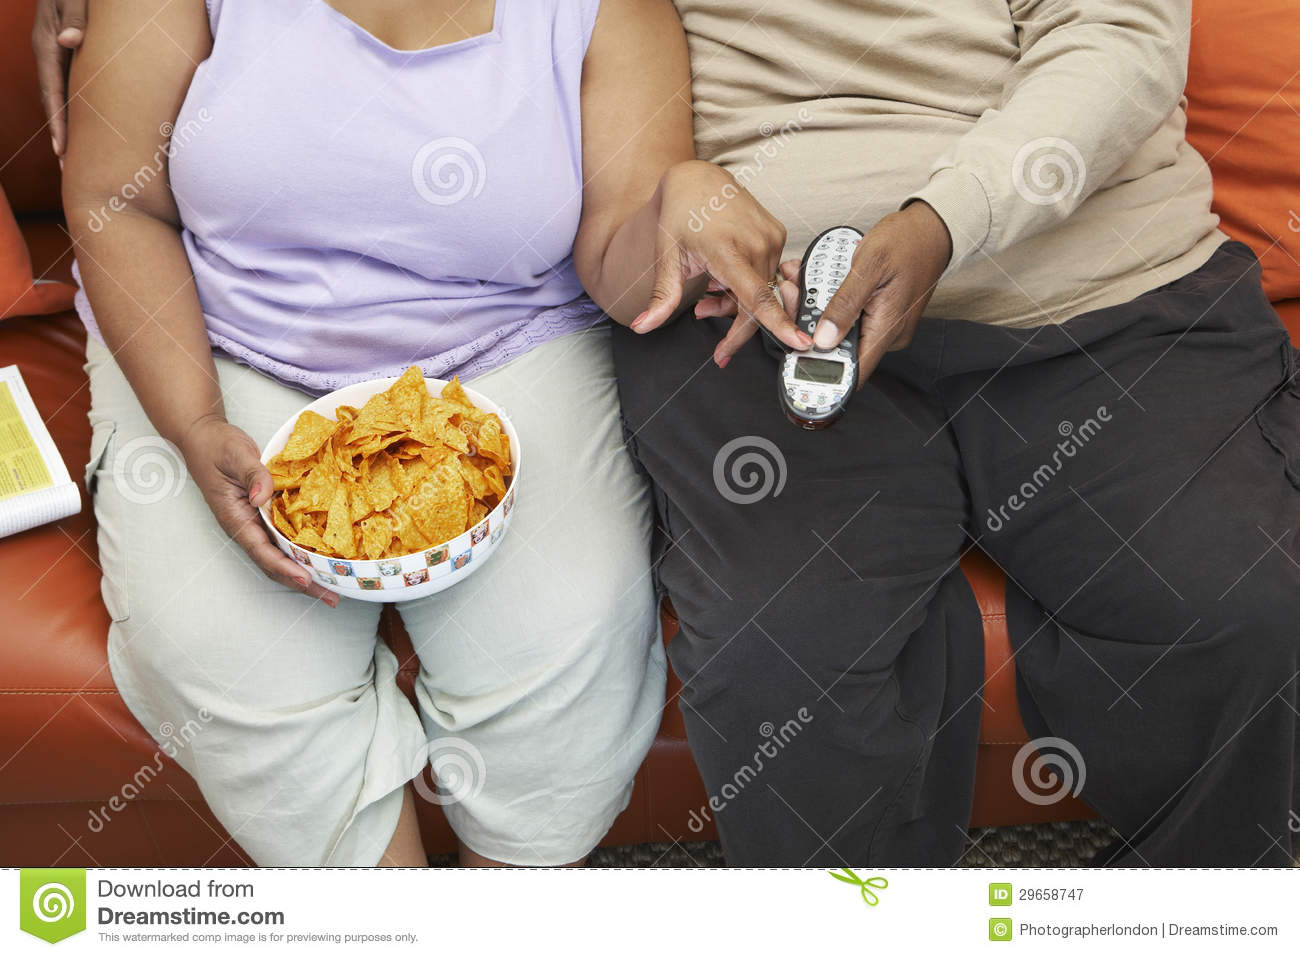 Midsection Of An Obese Couple Sitting On Couch With Nachos And Remote    